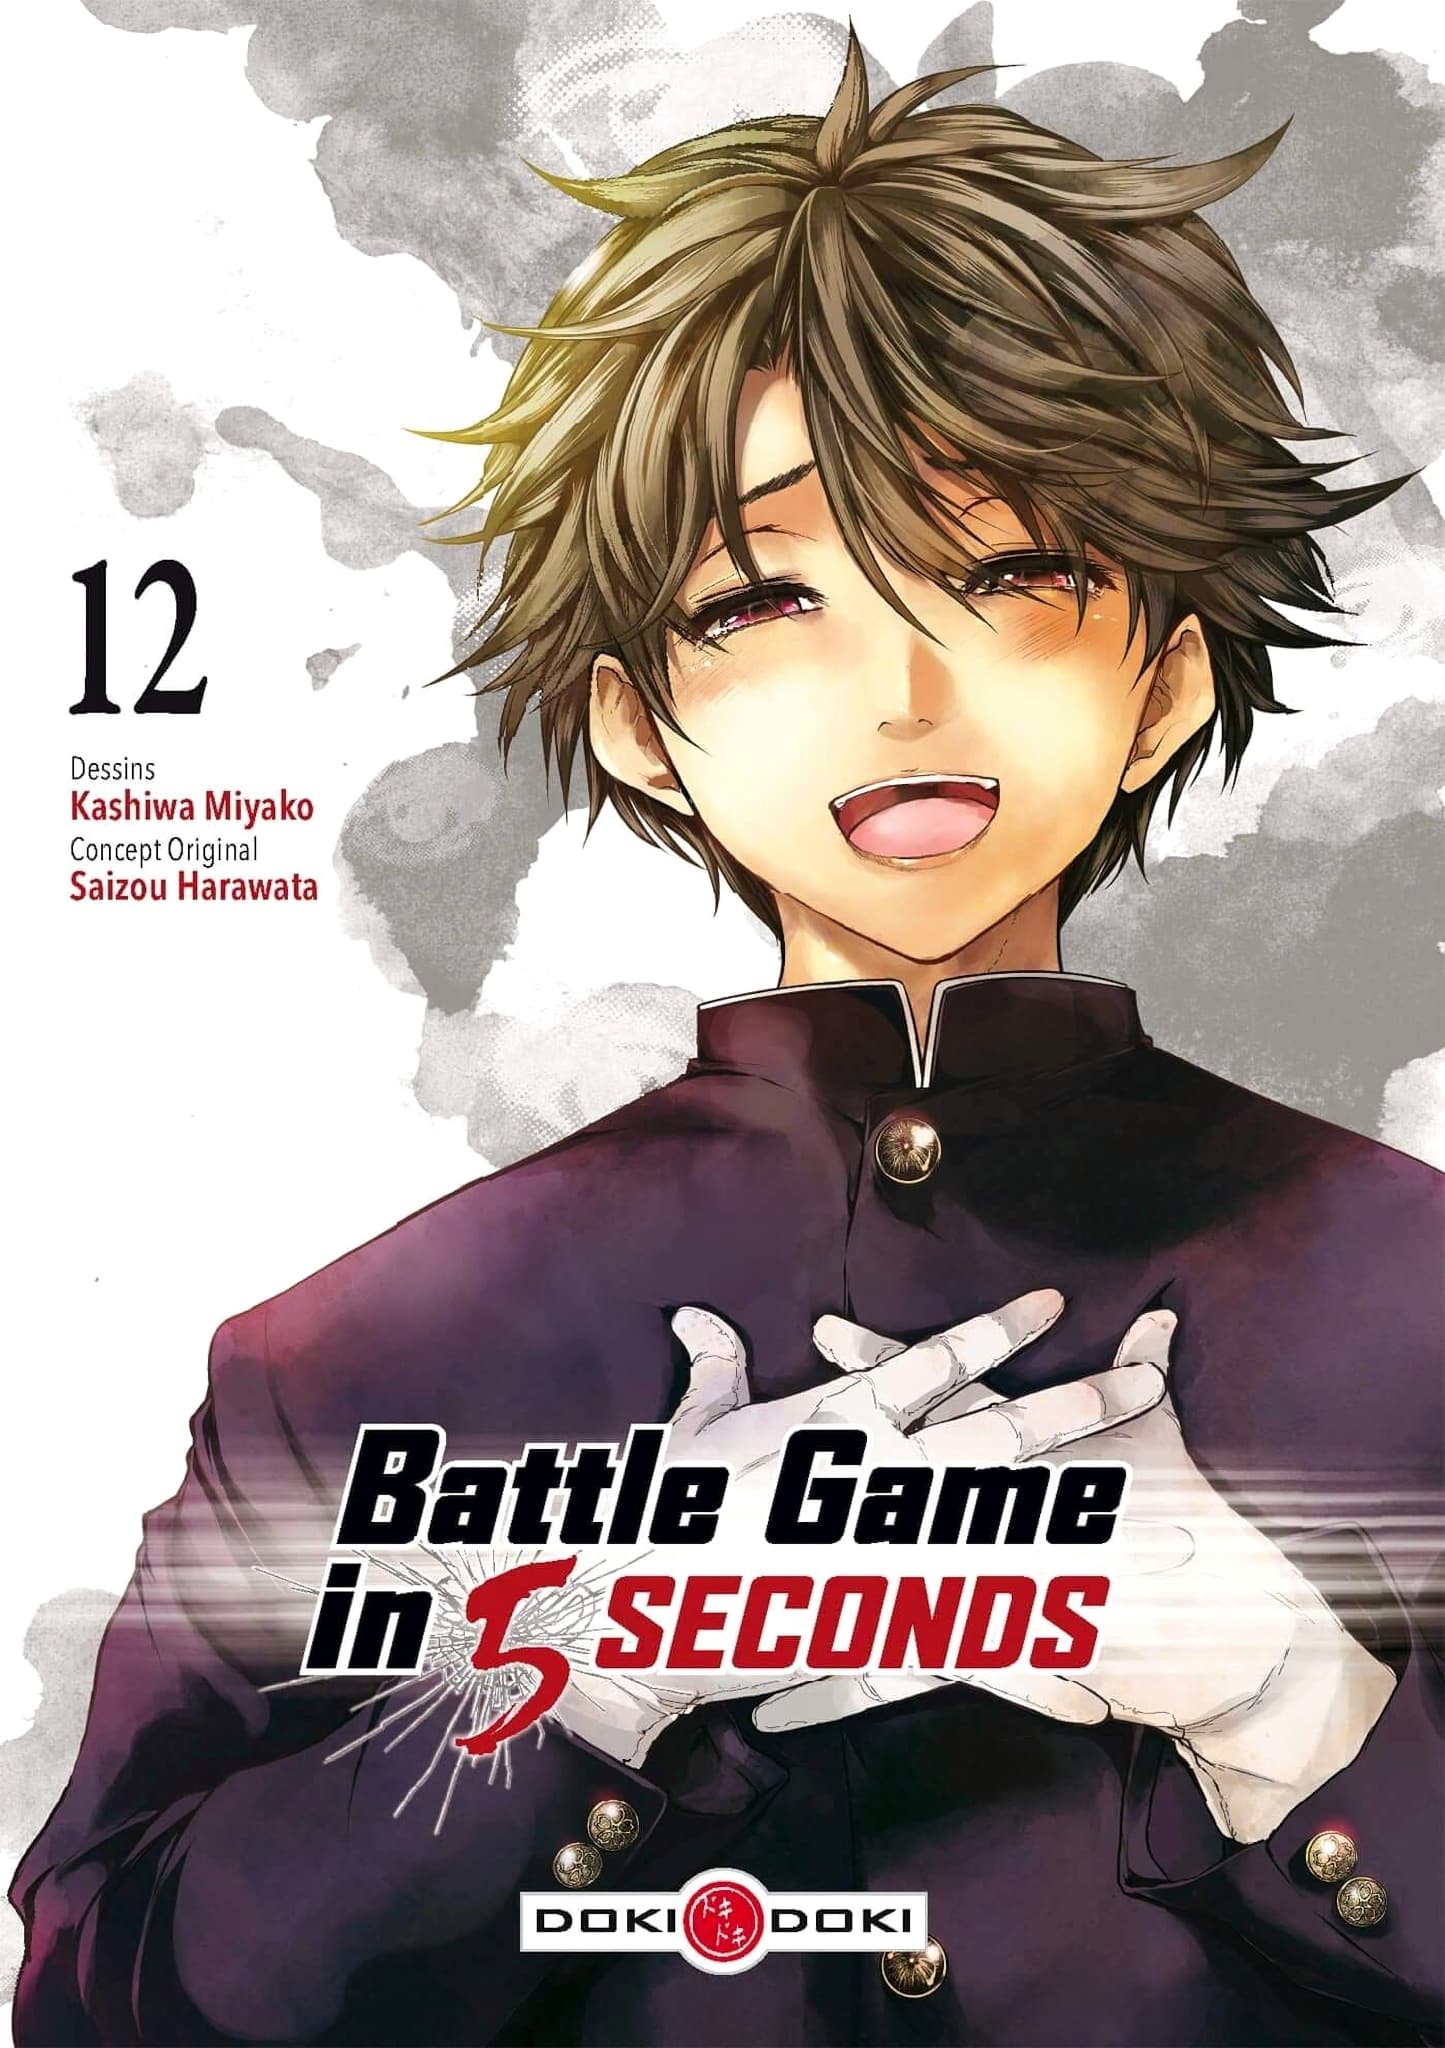 Tome 12 du manga Battle Game in 5 Seconds